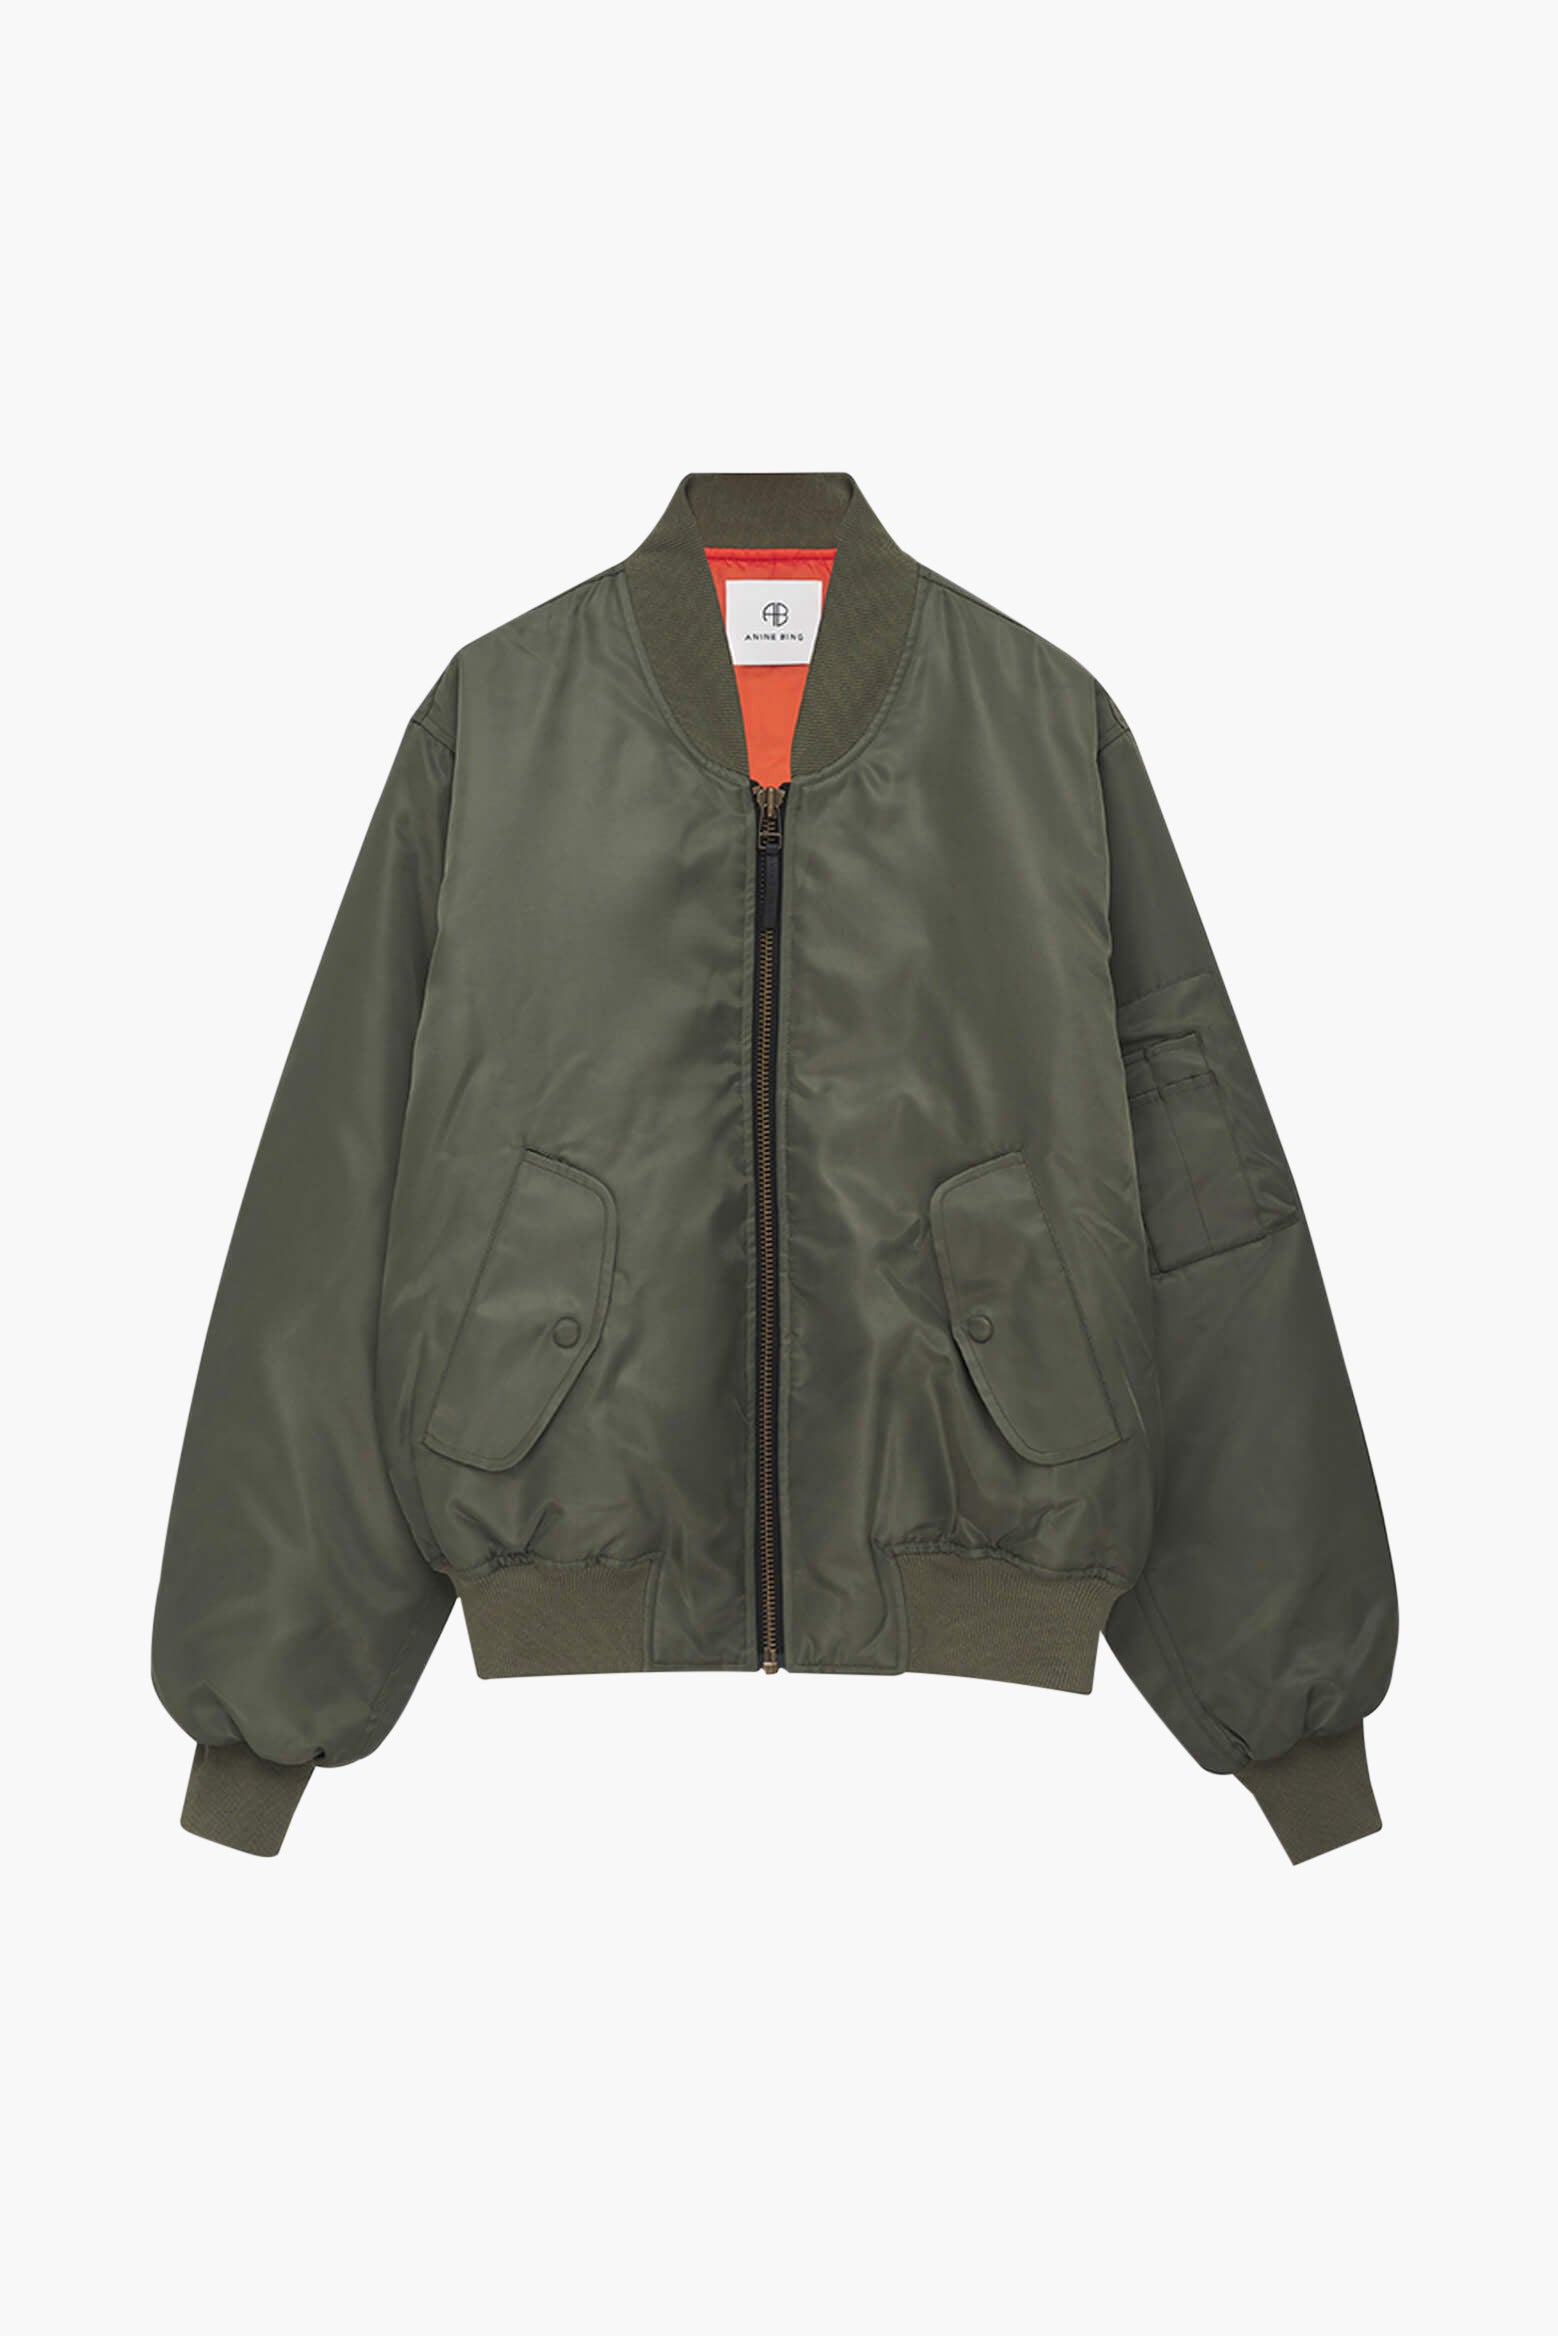 Anine Bing Leon Bomber in Army Green available at The New TrendAnine Bing Leon Bomber in Army Green available at The New Trend